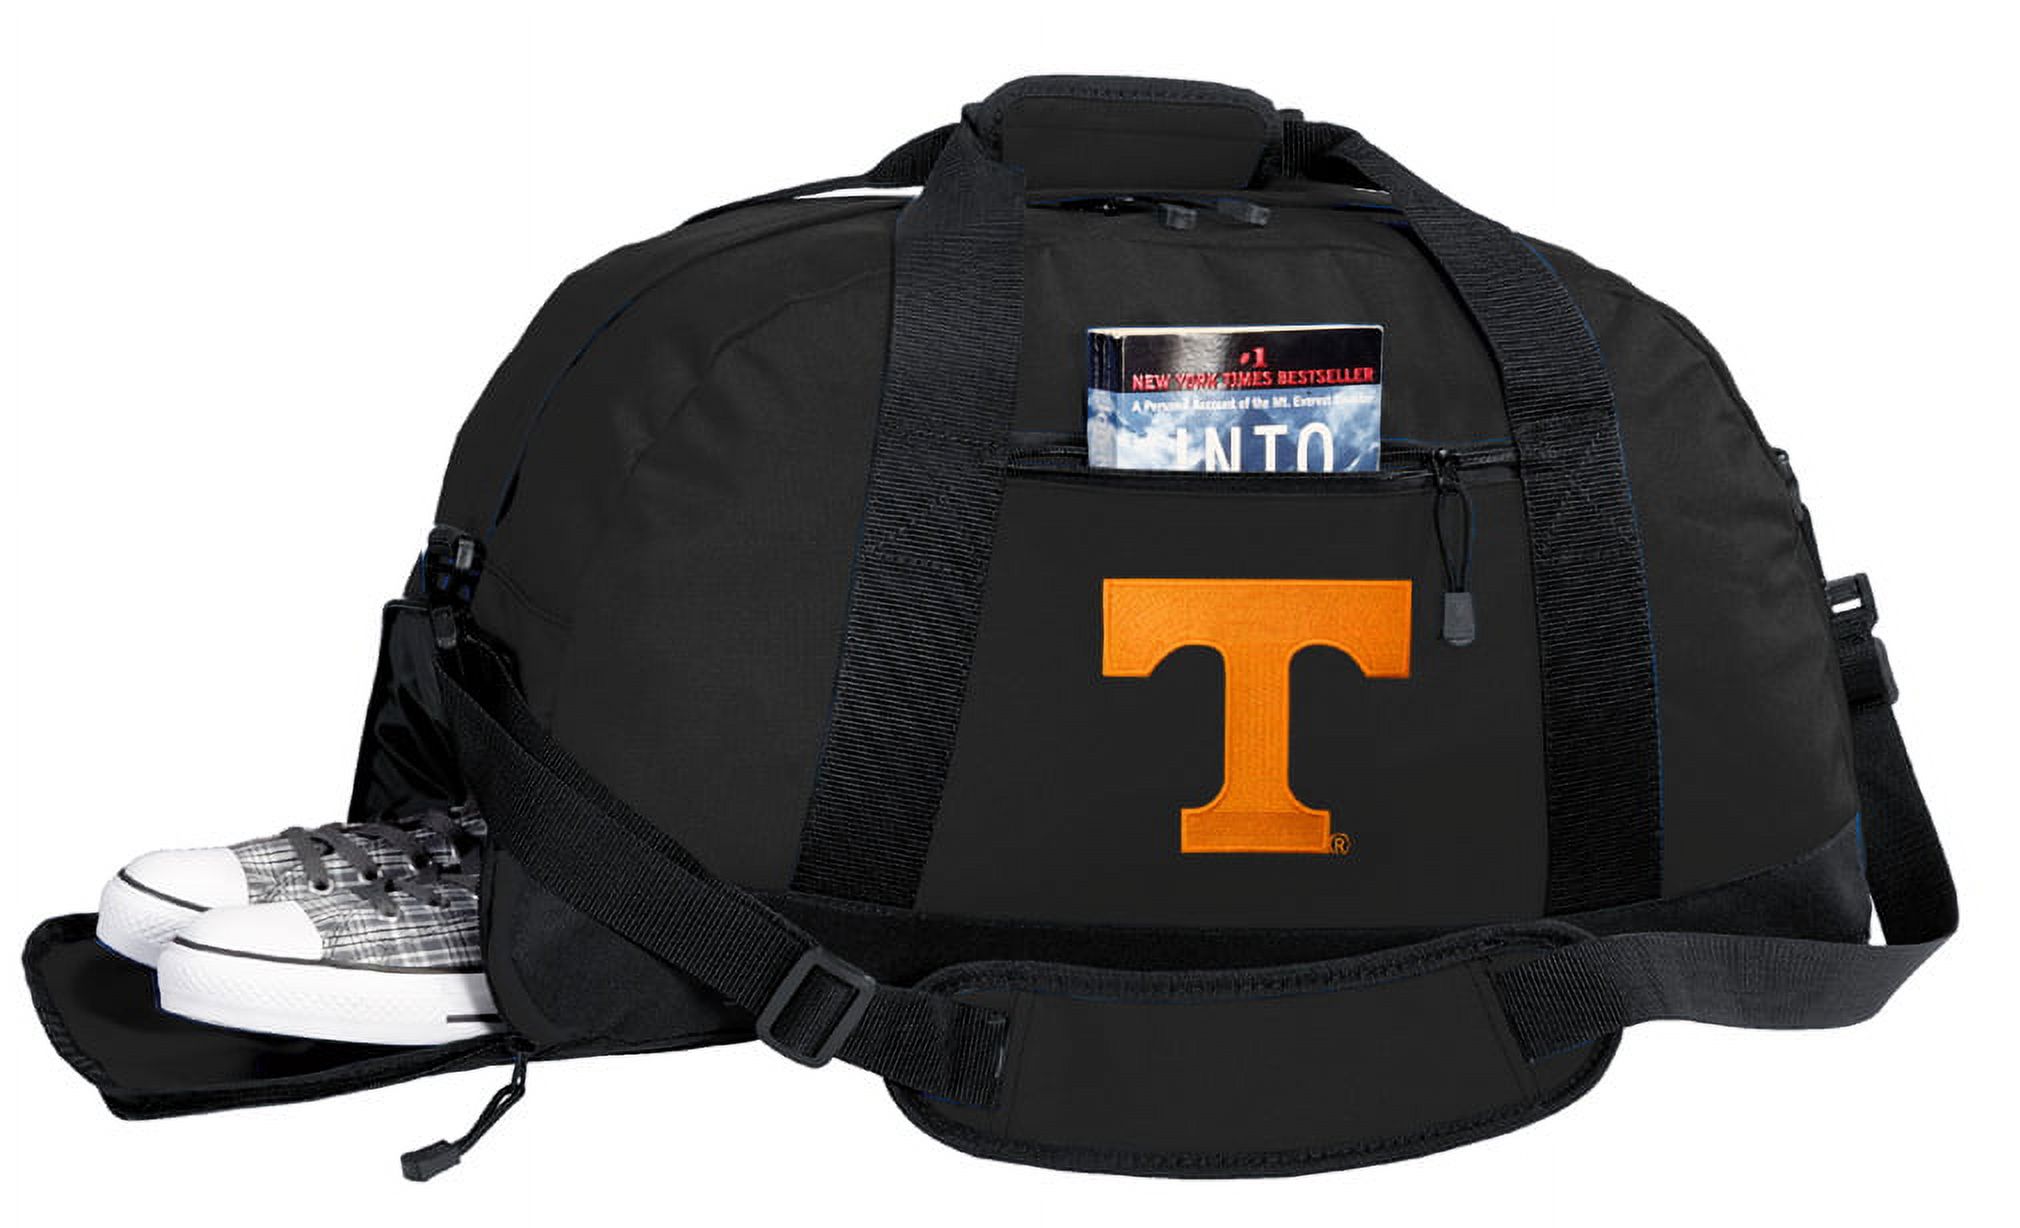 Tennessee Duffel Bag or University Tennessee Gym Bag WITH SHOE POCKET - image 1 of 2